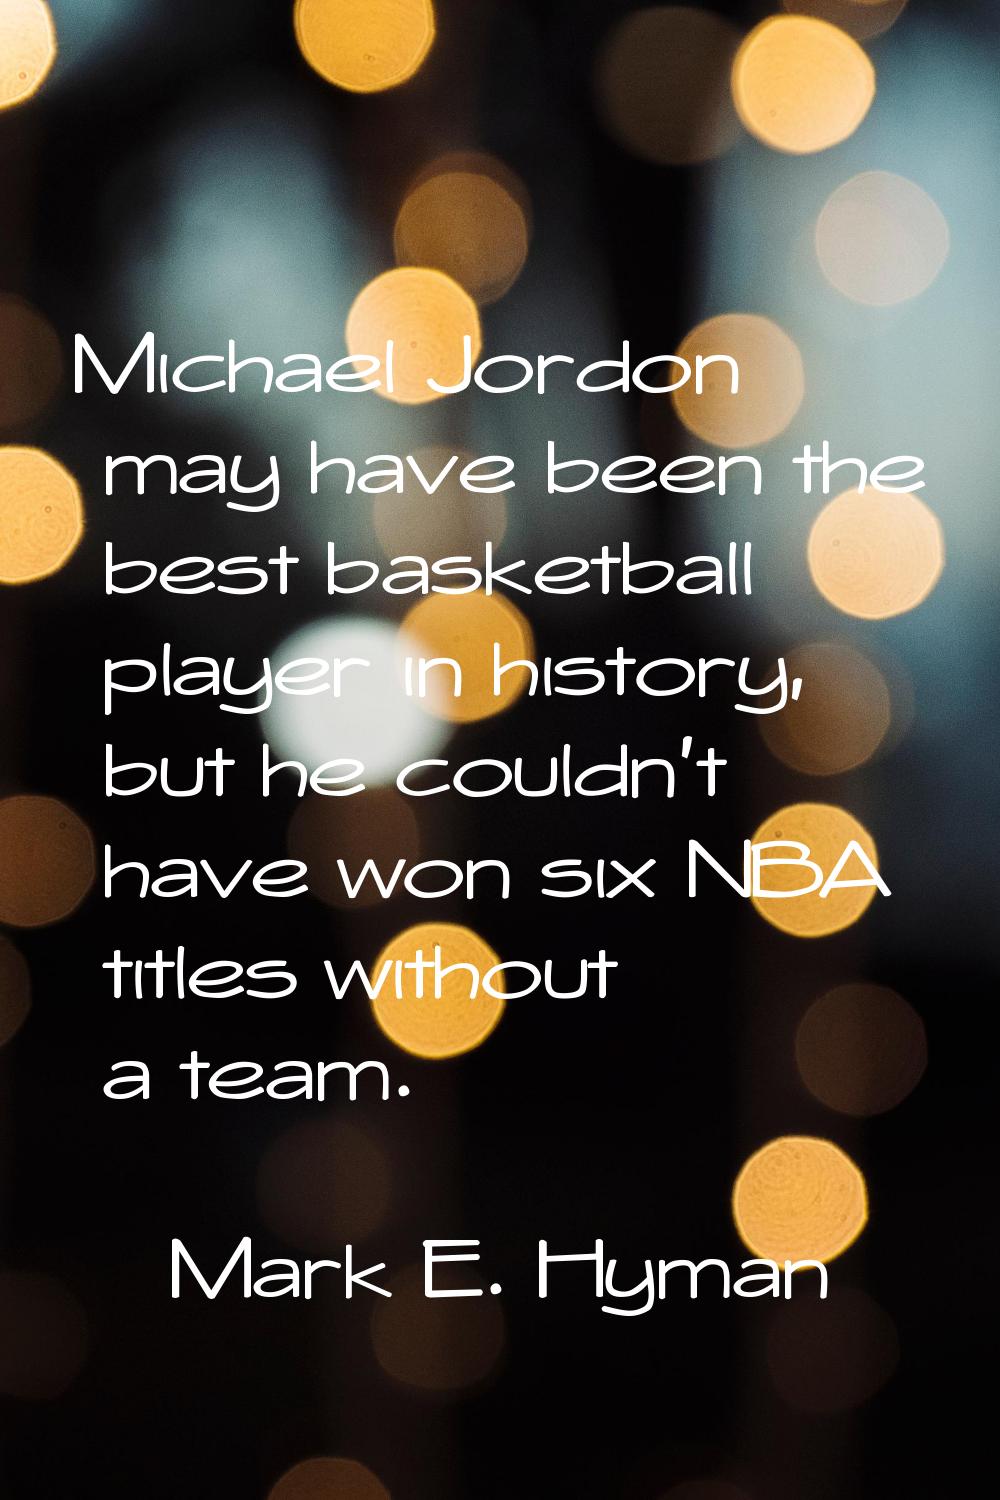 Michael Jordon may have been the best basketball player in history, but he couldn't have won six NB